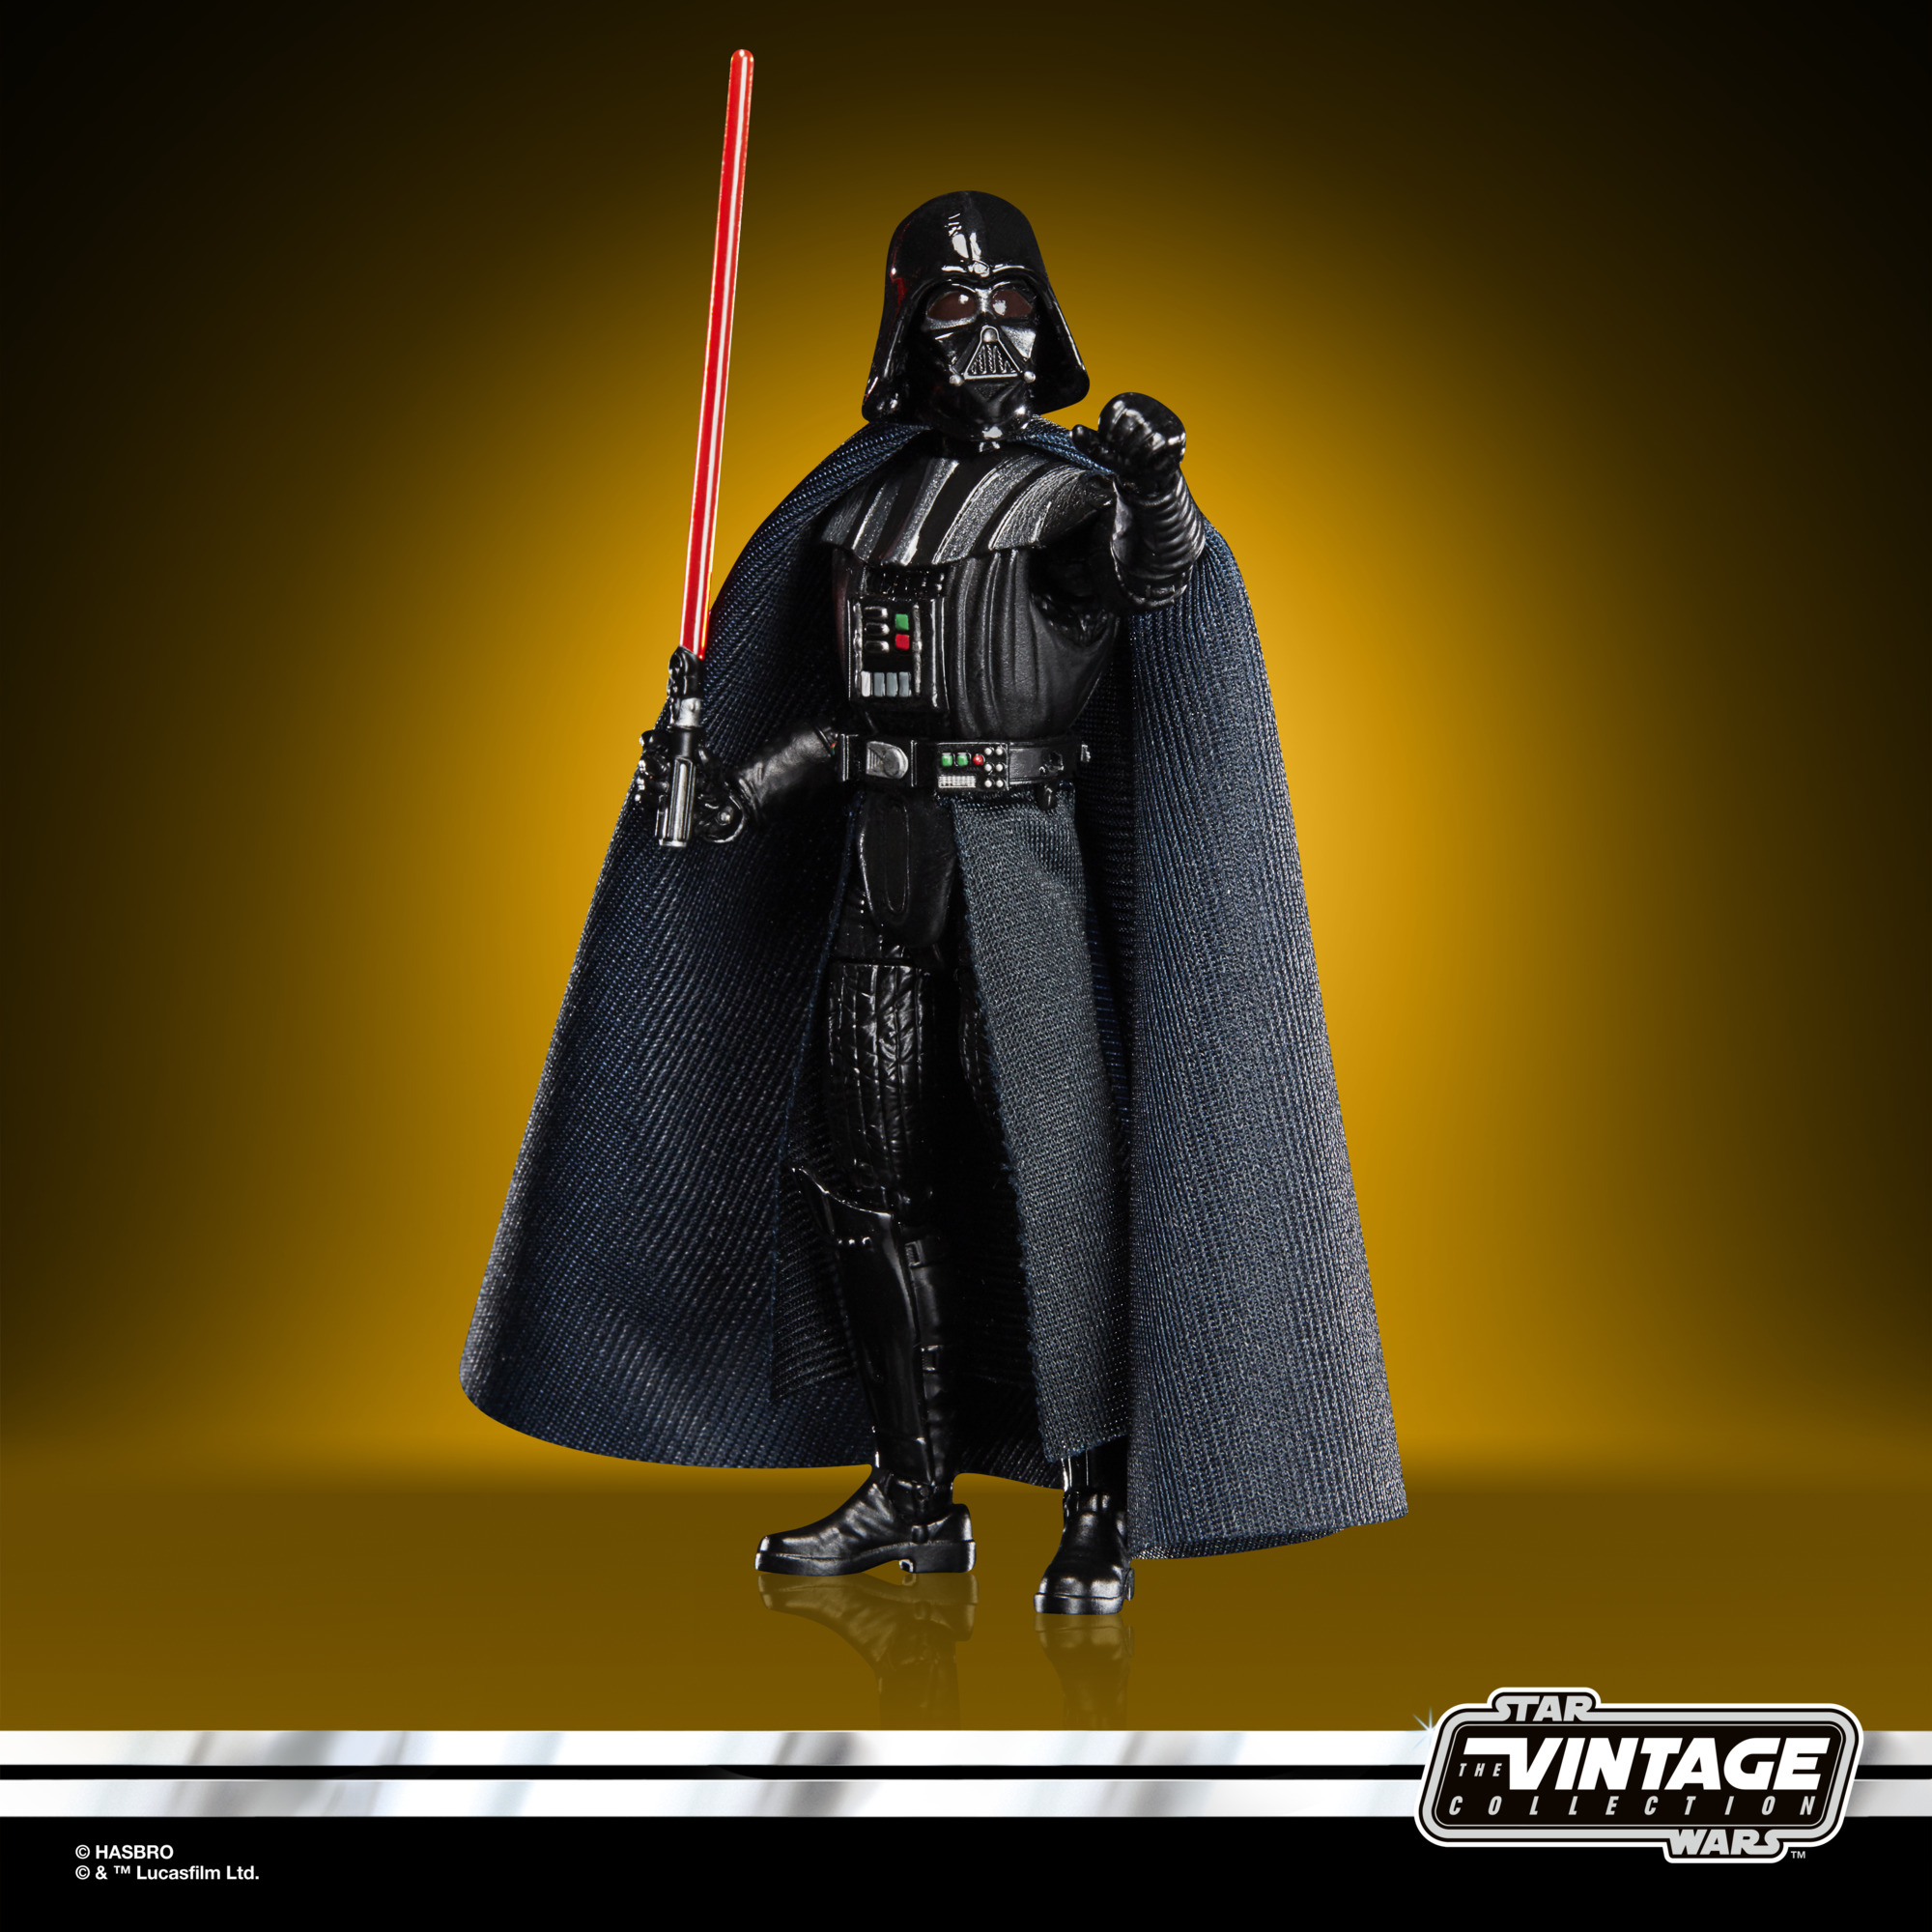 Star Wars The Vintage Collection Darth Vader (The Dark Times) F44755X0 5010994152079 